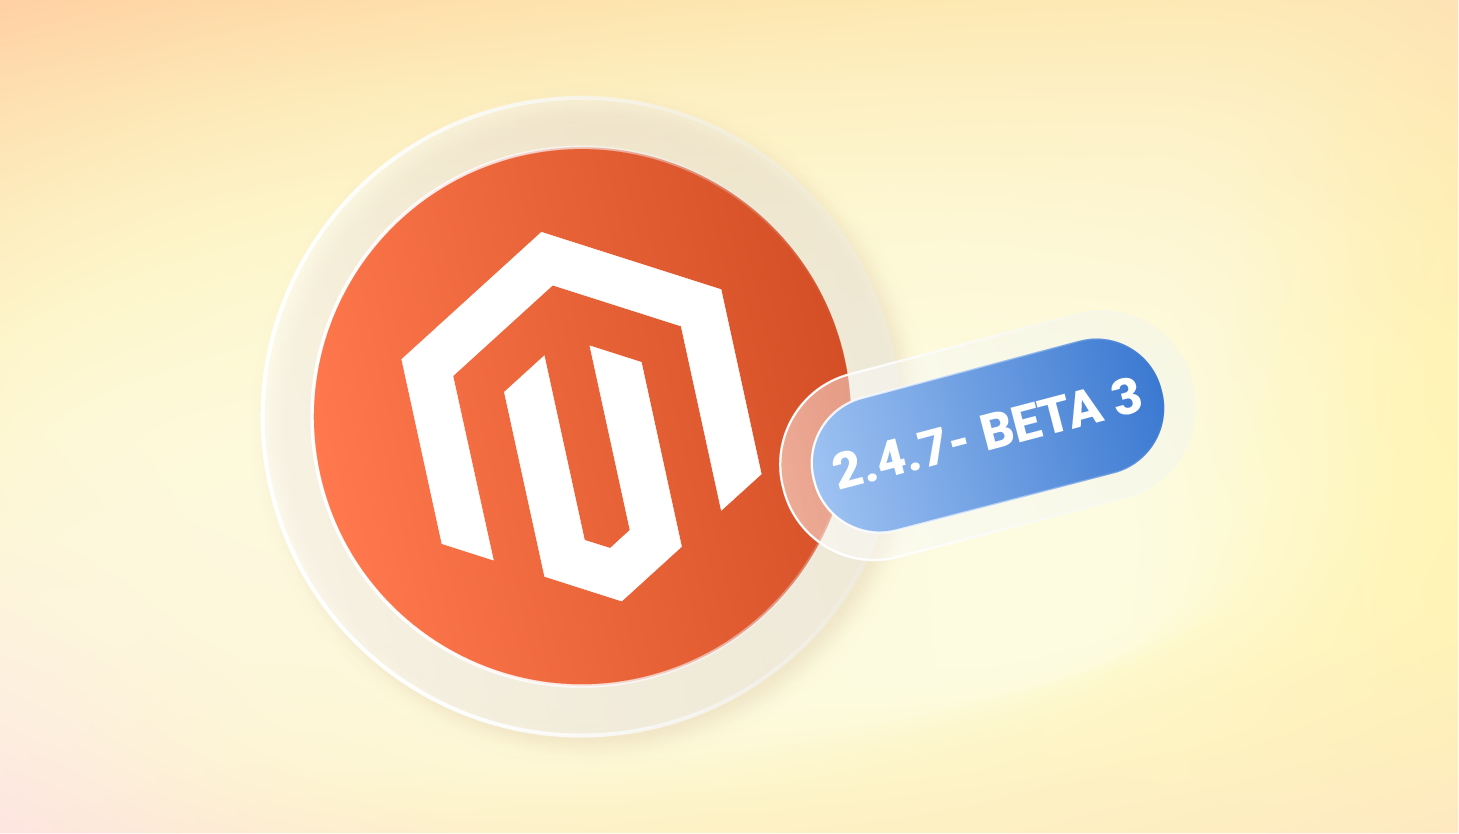 Magento 2.4.7-beta3: Release Notes, Features, and Improvements